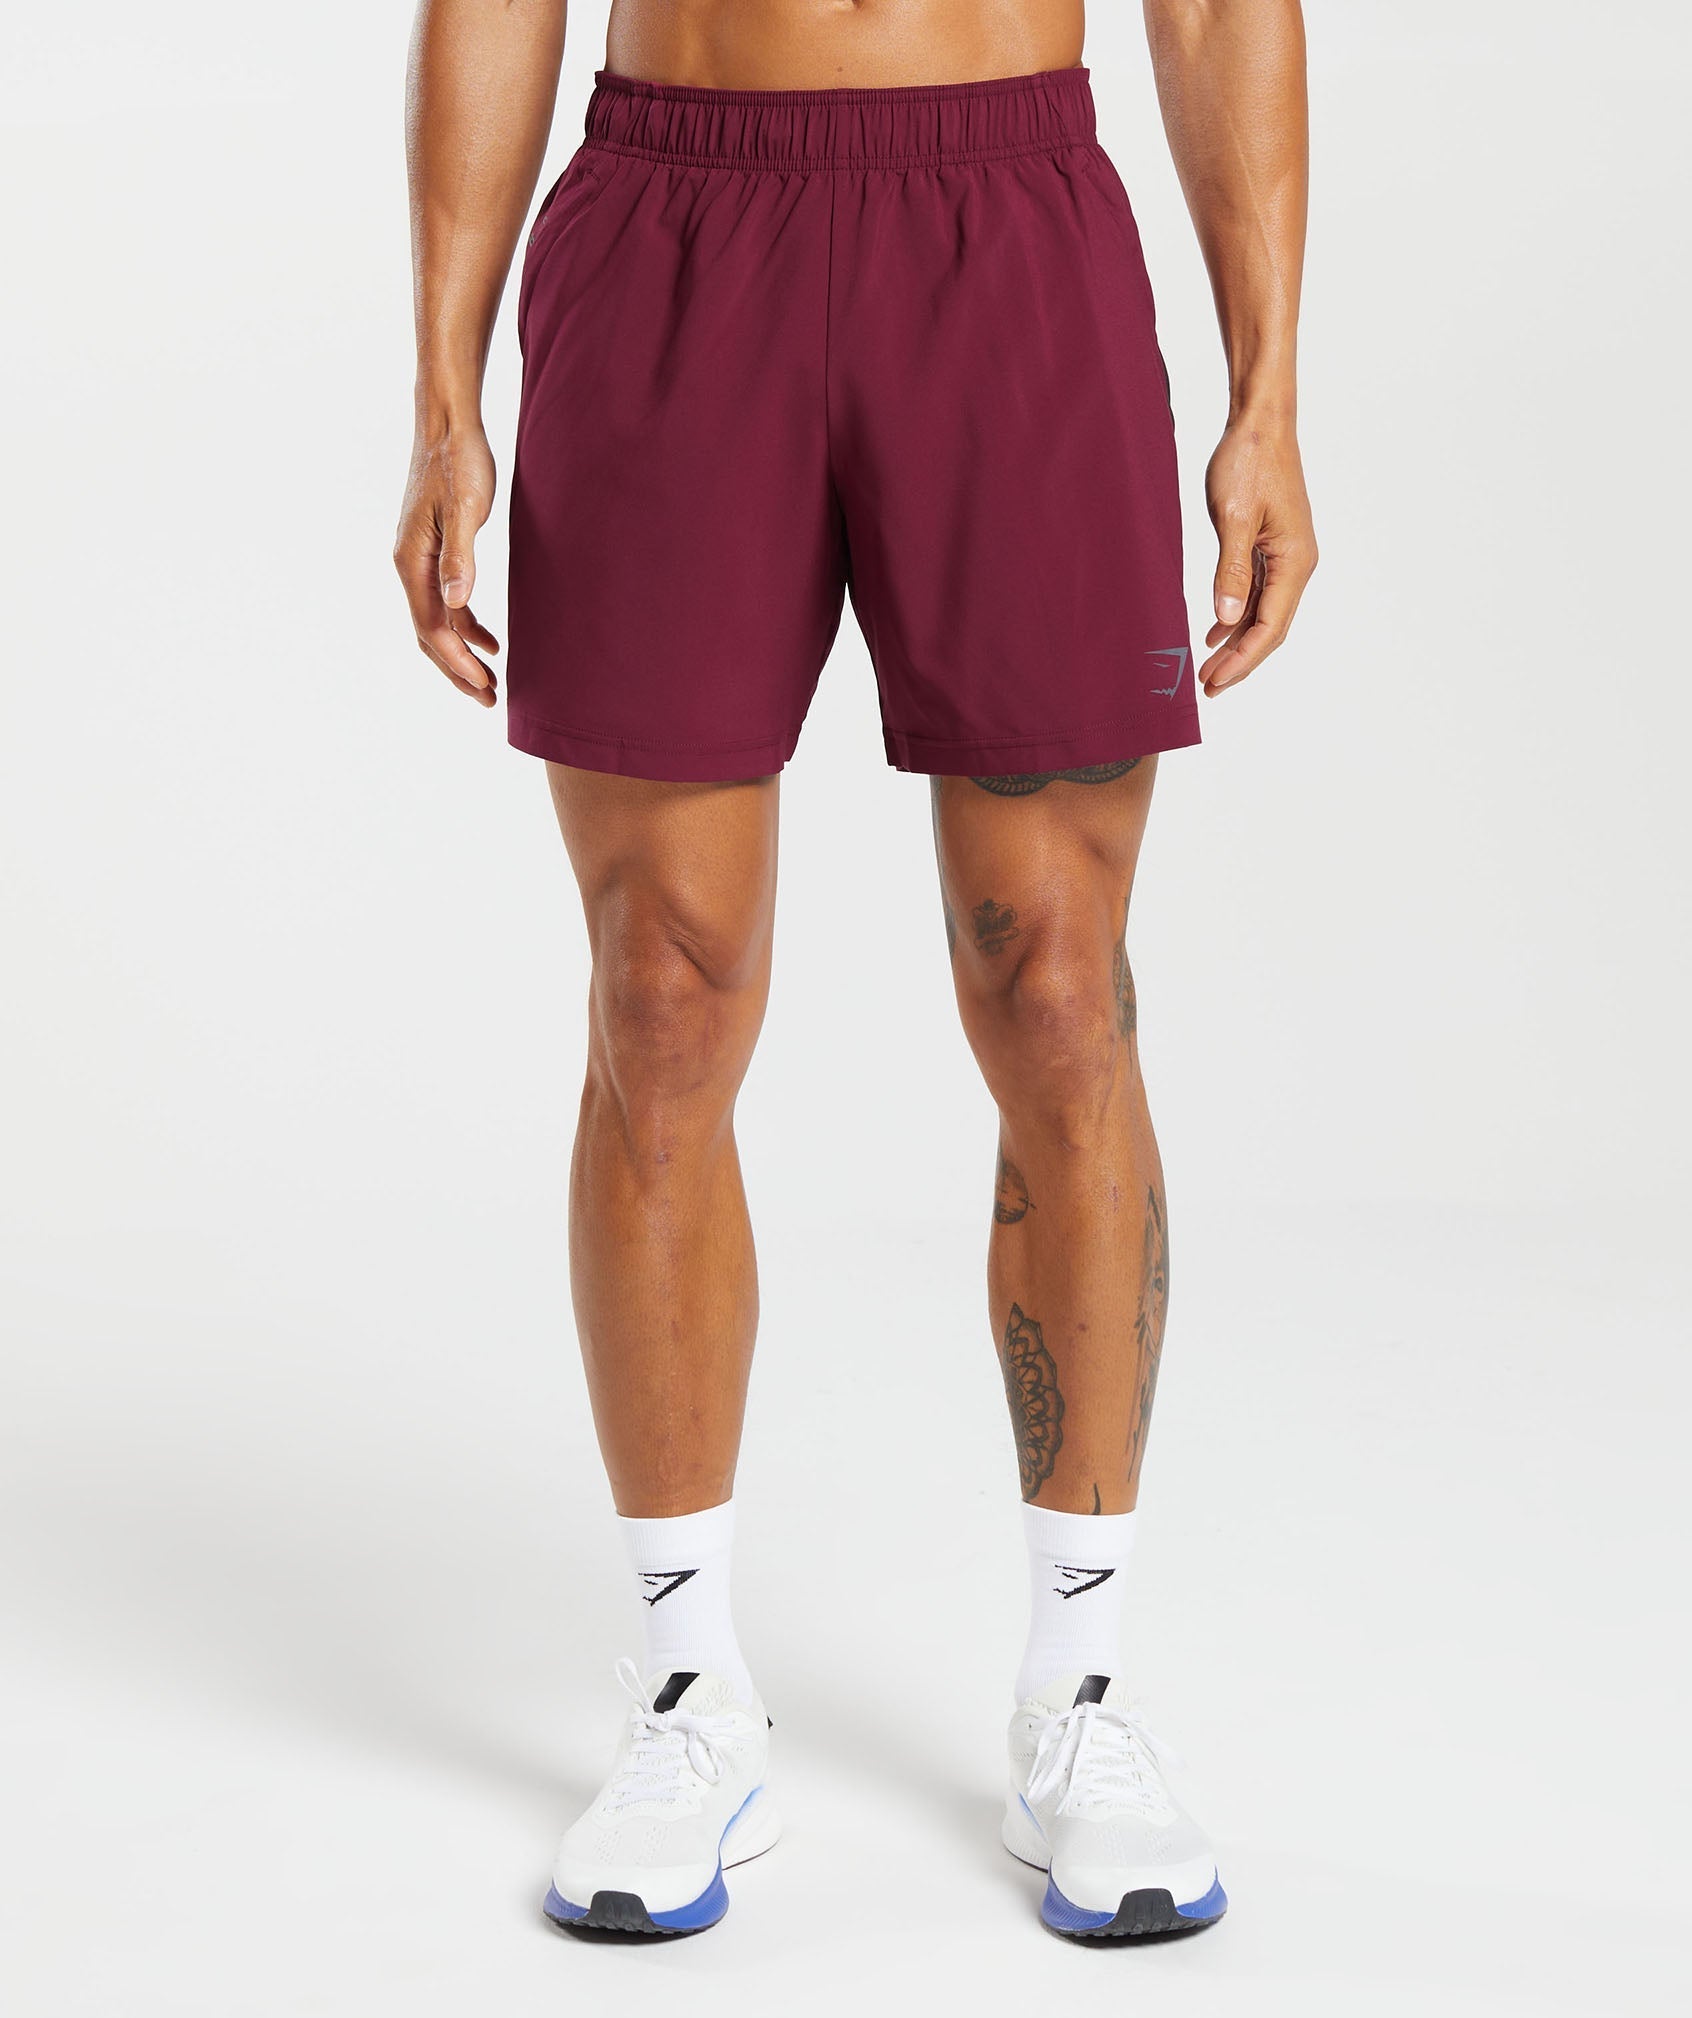 Gymshark Sport Shorts - Persimmon Red/Silhouette Grey